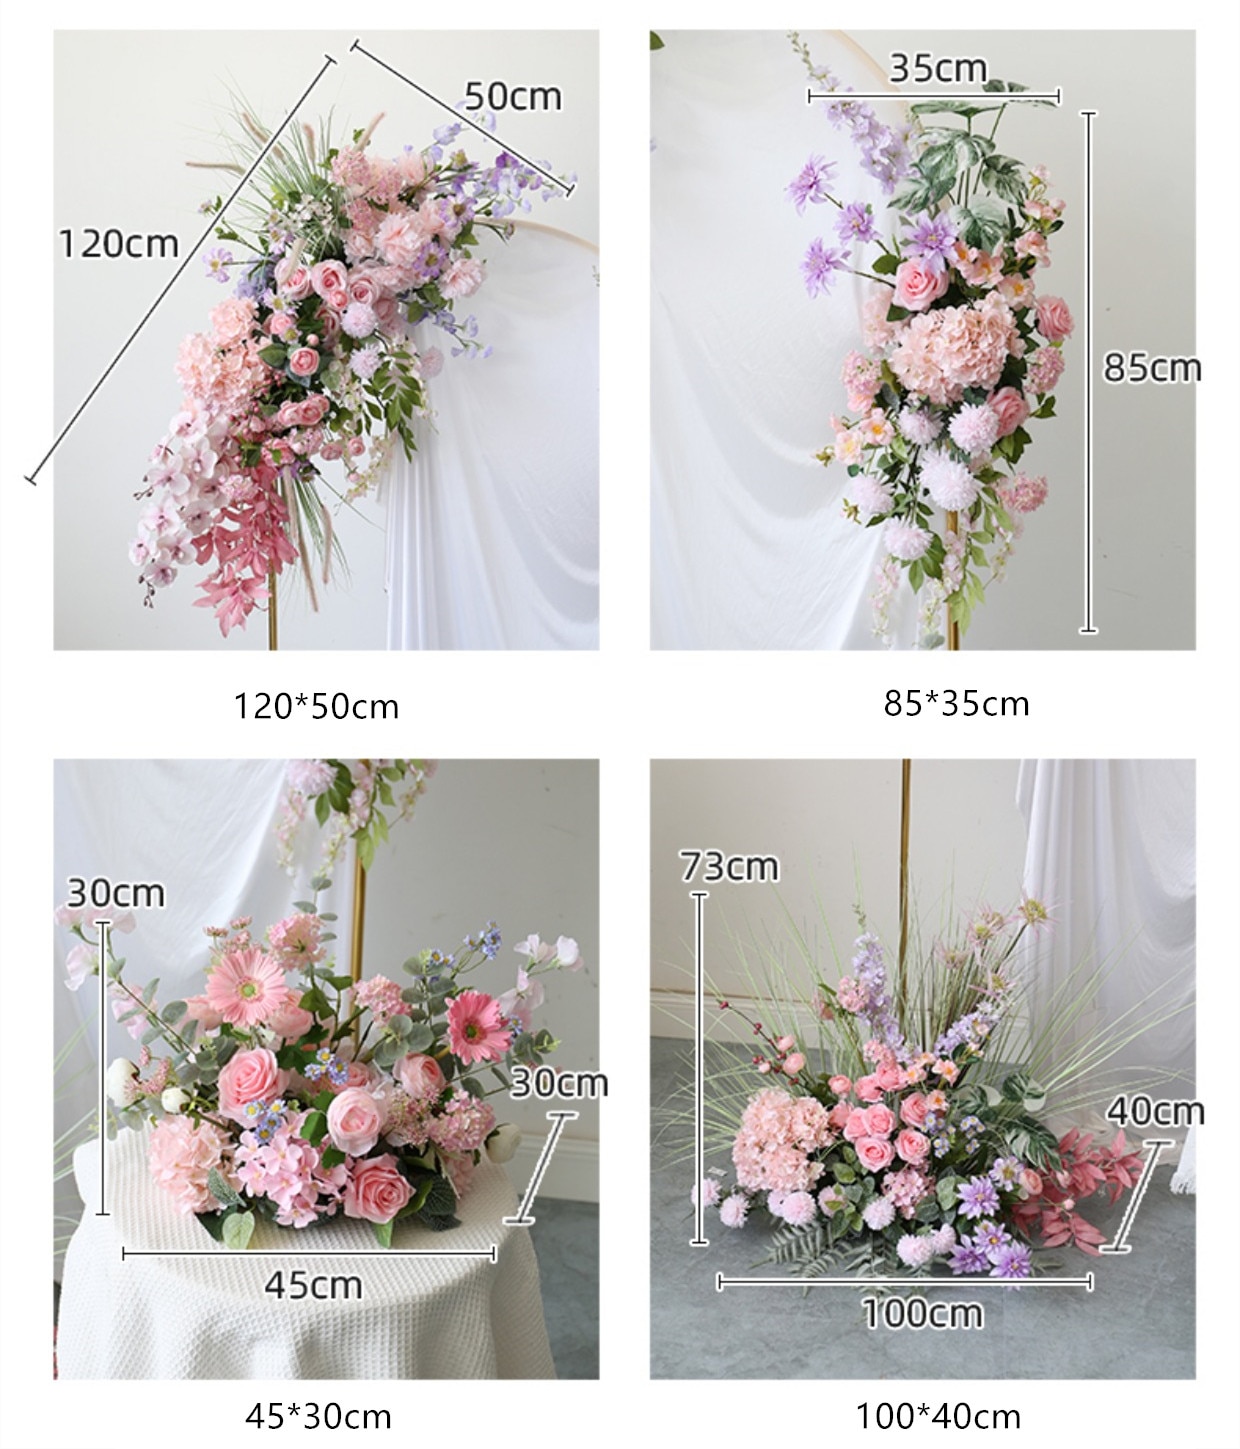 Techniques for arranging rose flowers in a bouquet or centerpiece